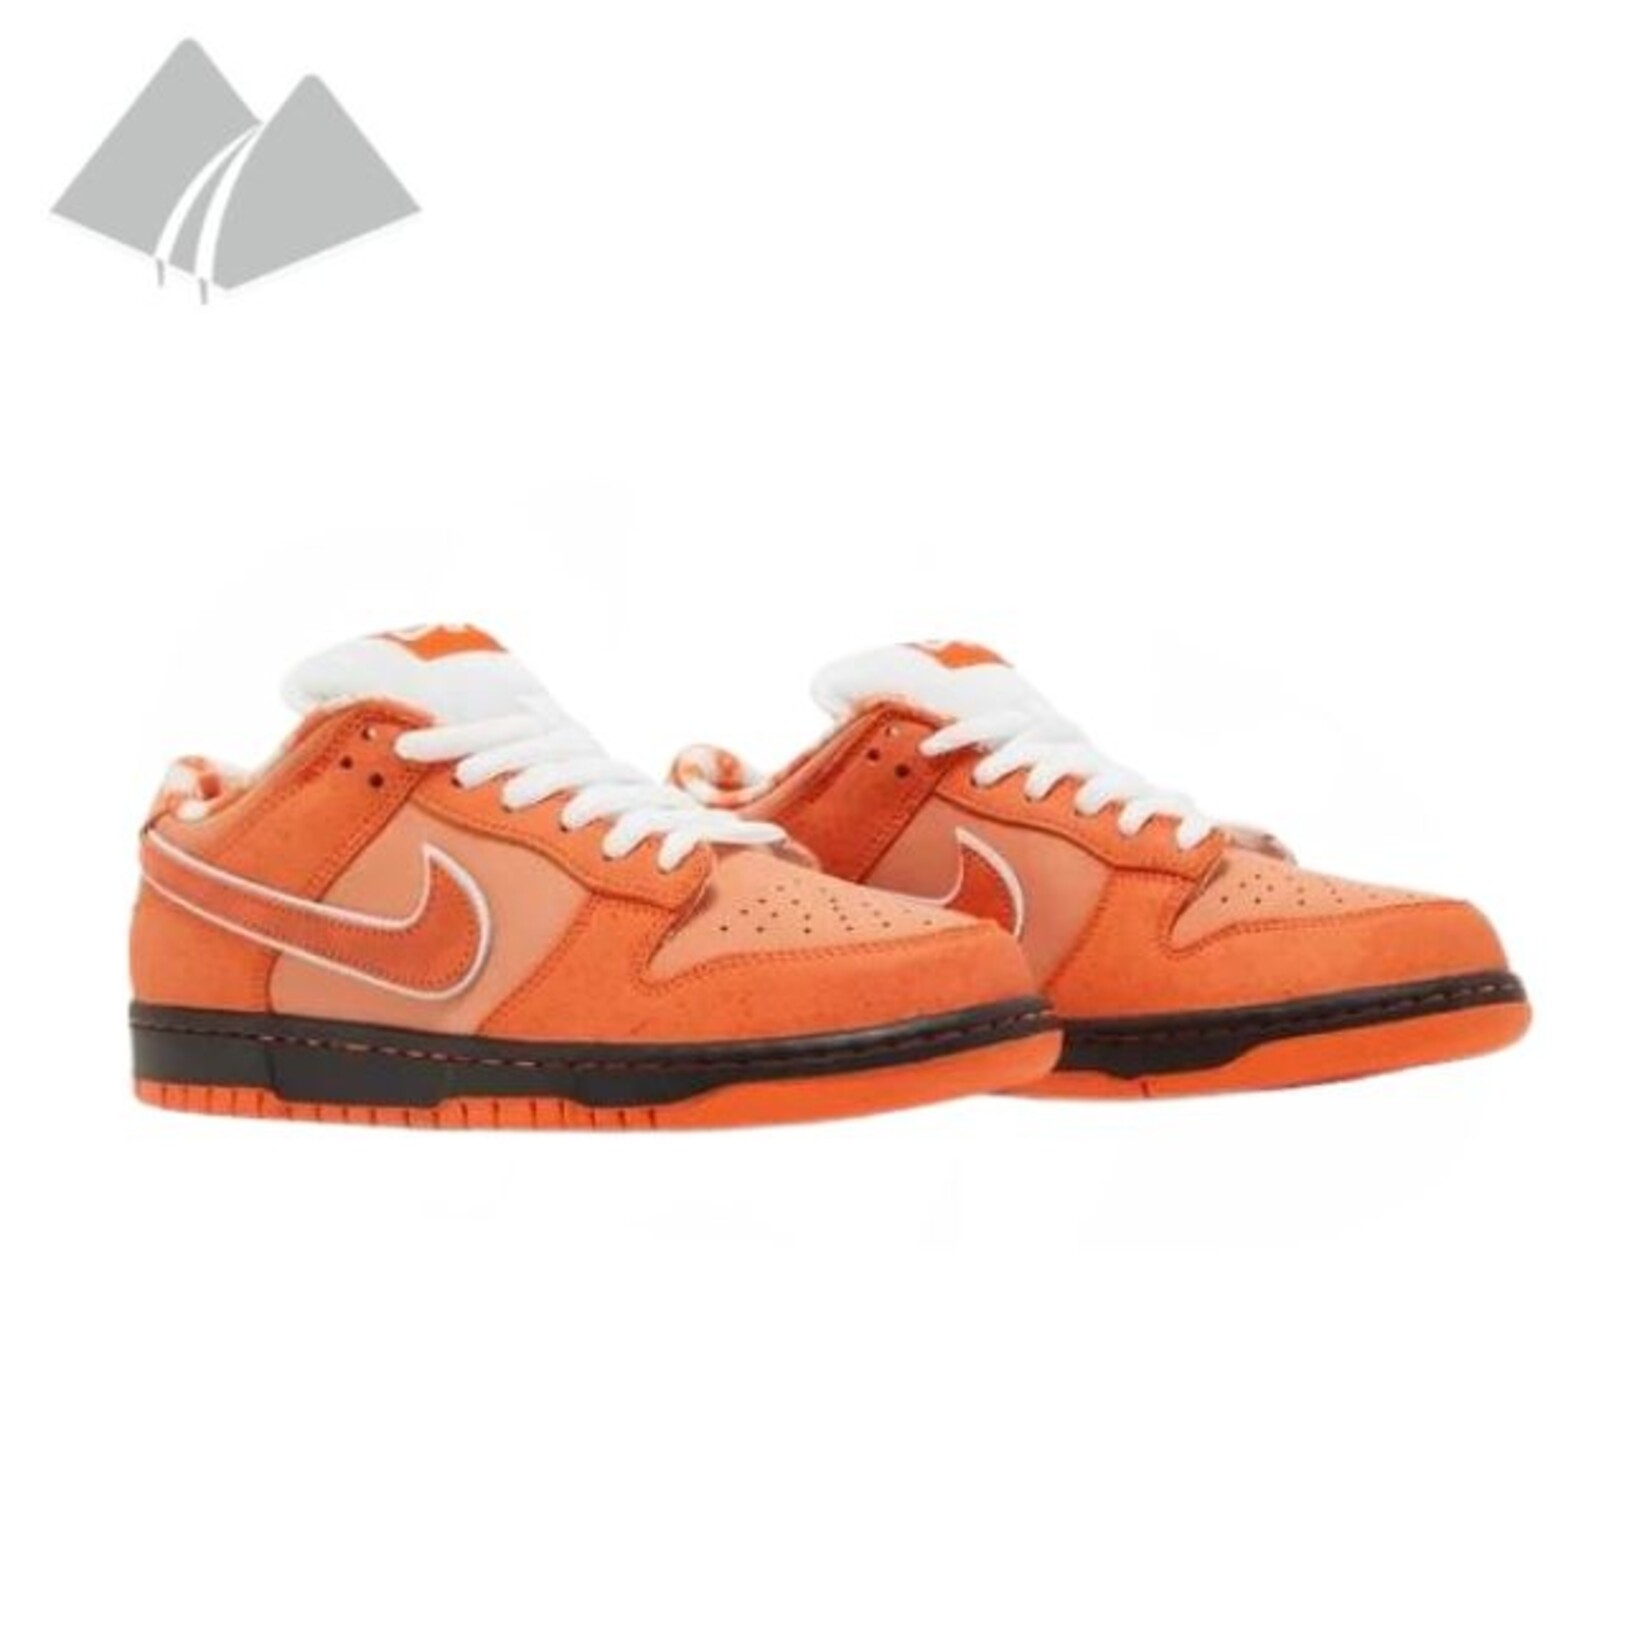 Nike Nike SB Dunk Low (M) Concepts Orange Lobster (Special Box)